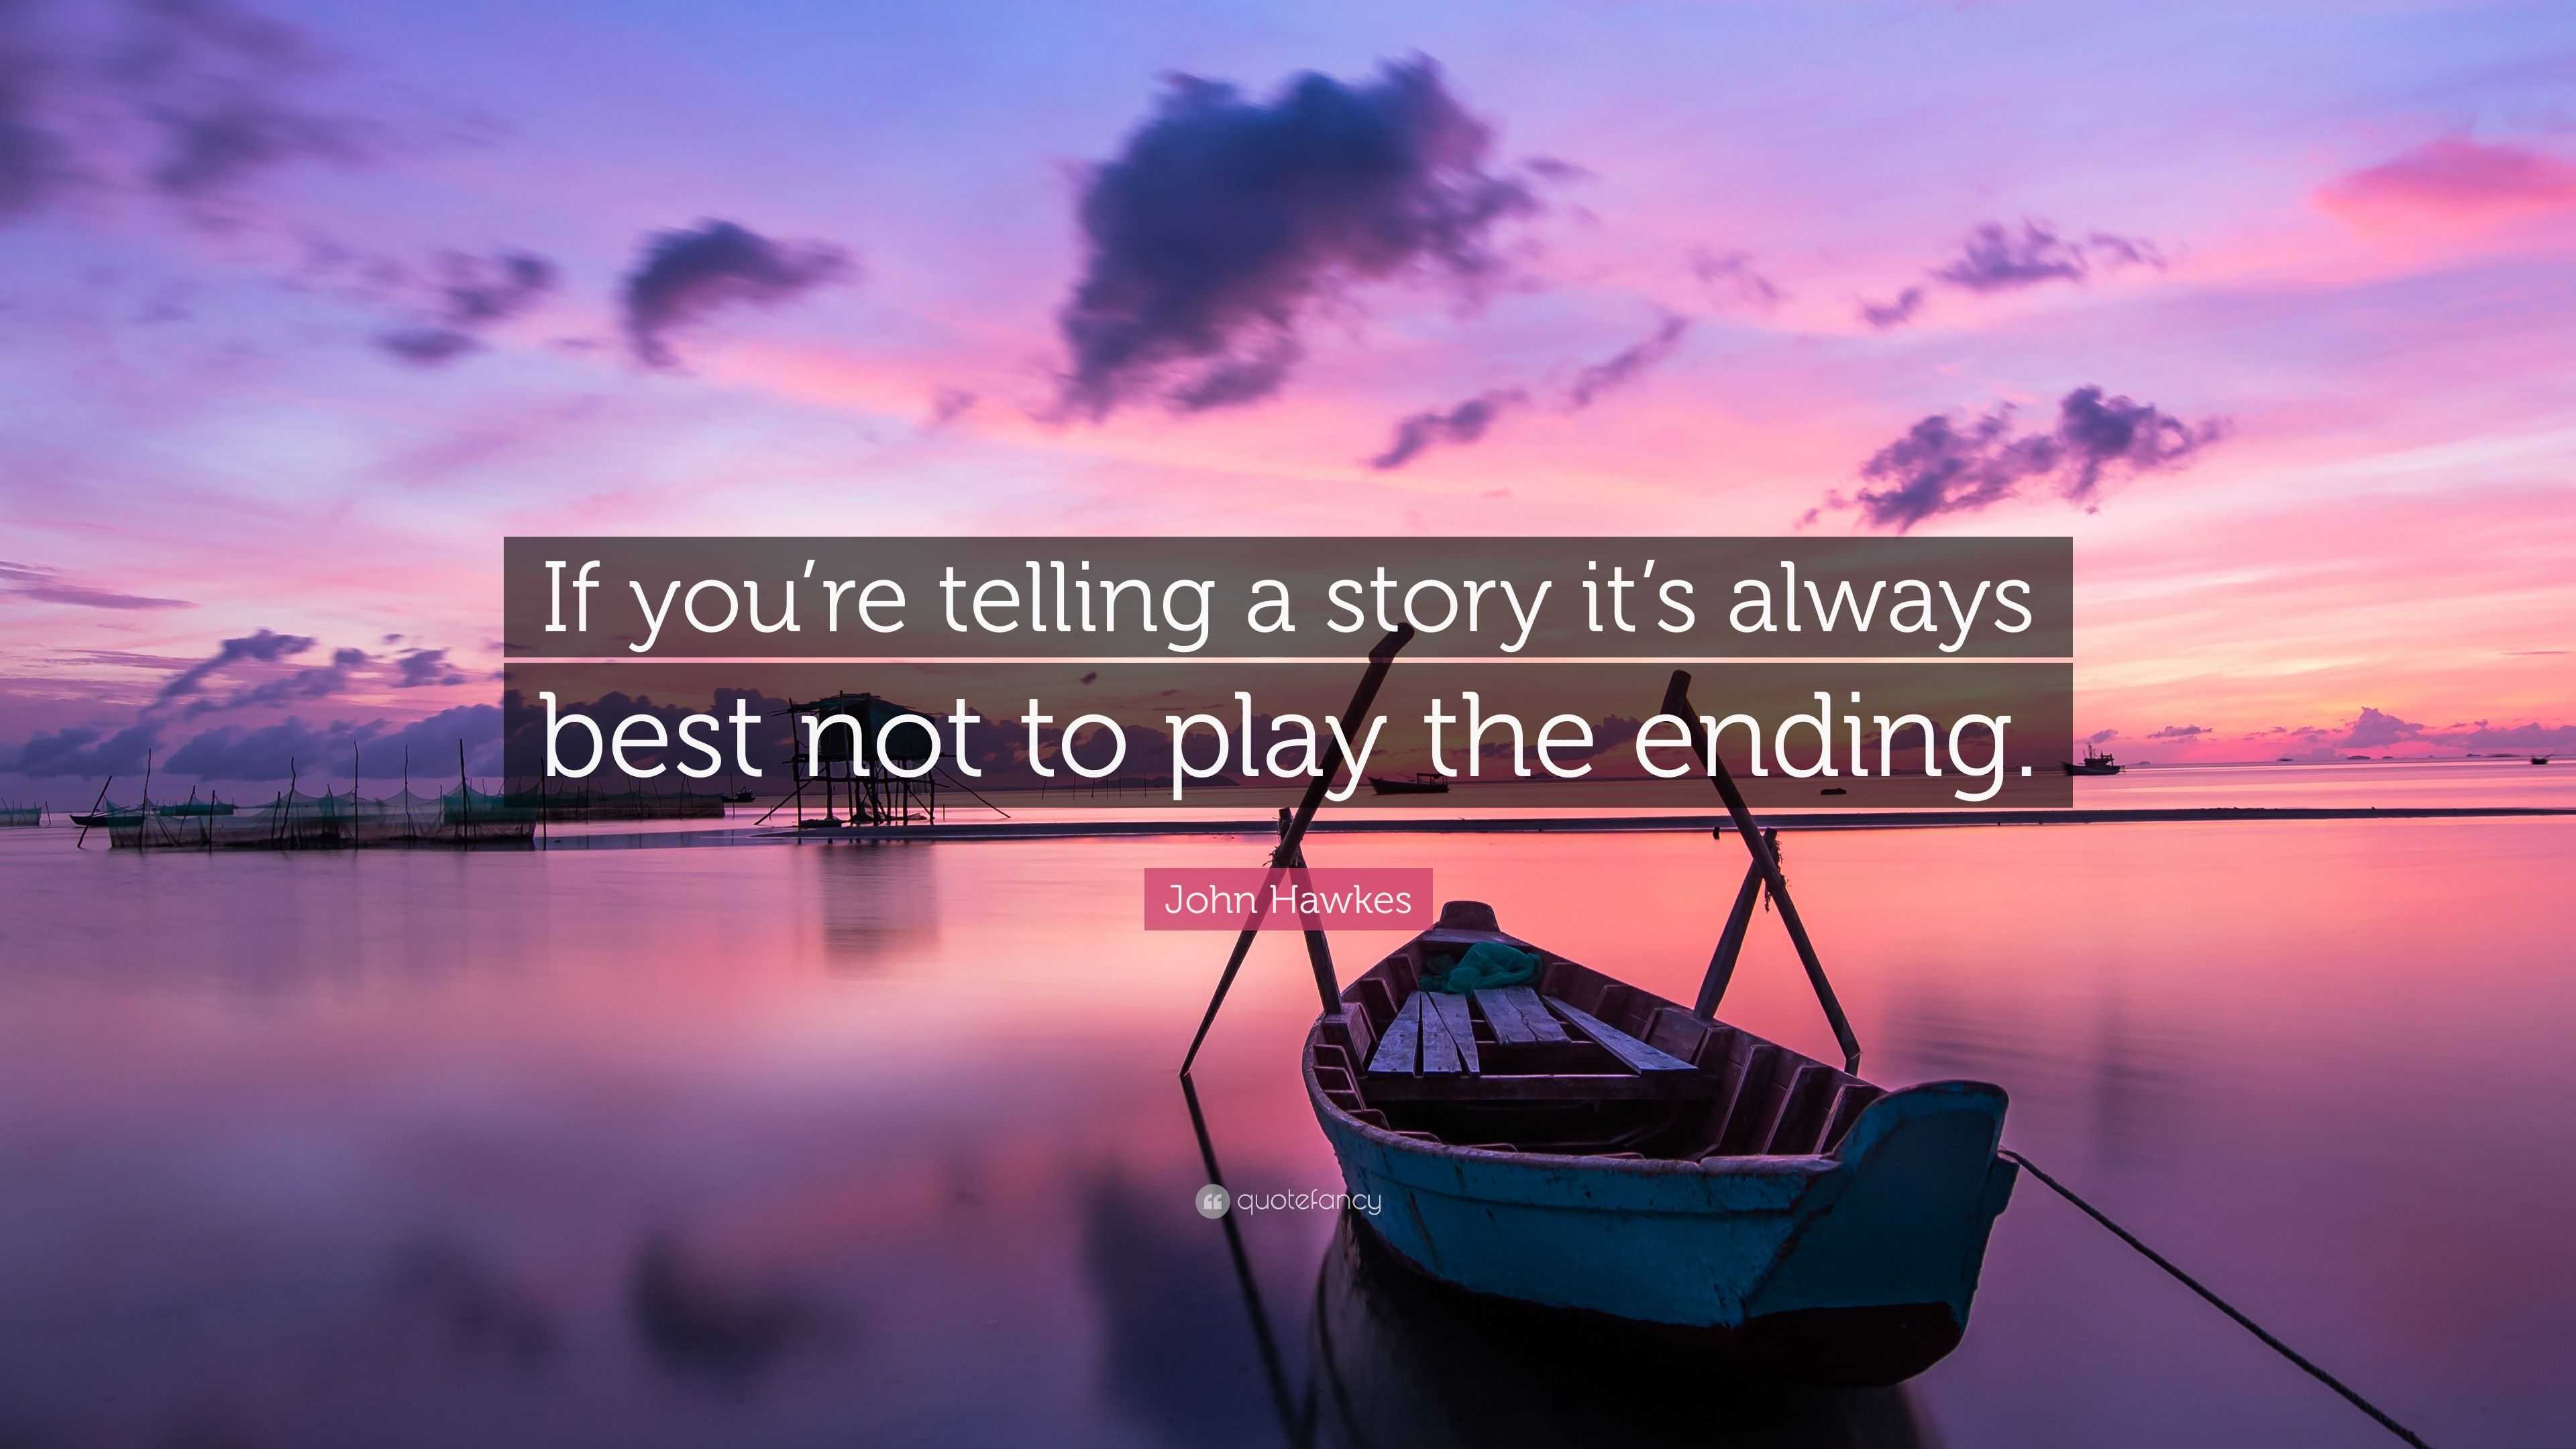 John Hawkes Quote “if You Re Telling A Story It S Always Best Not To Play The Ending ”